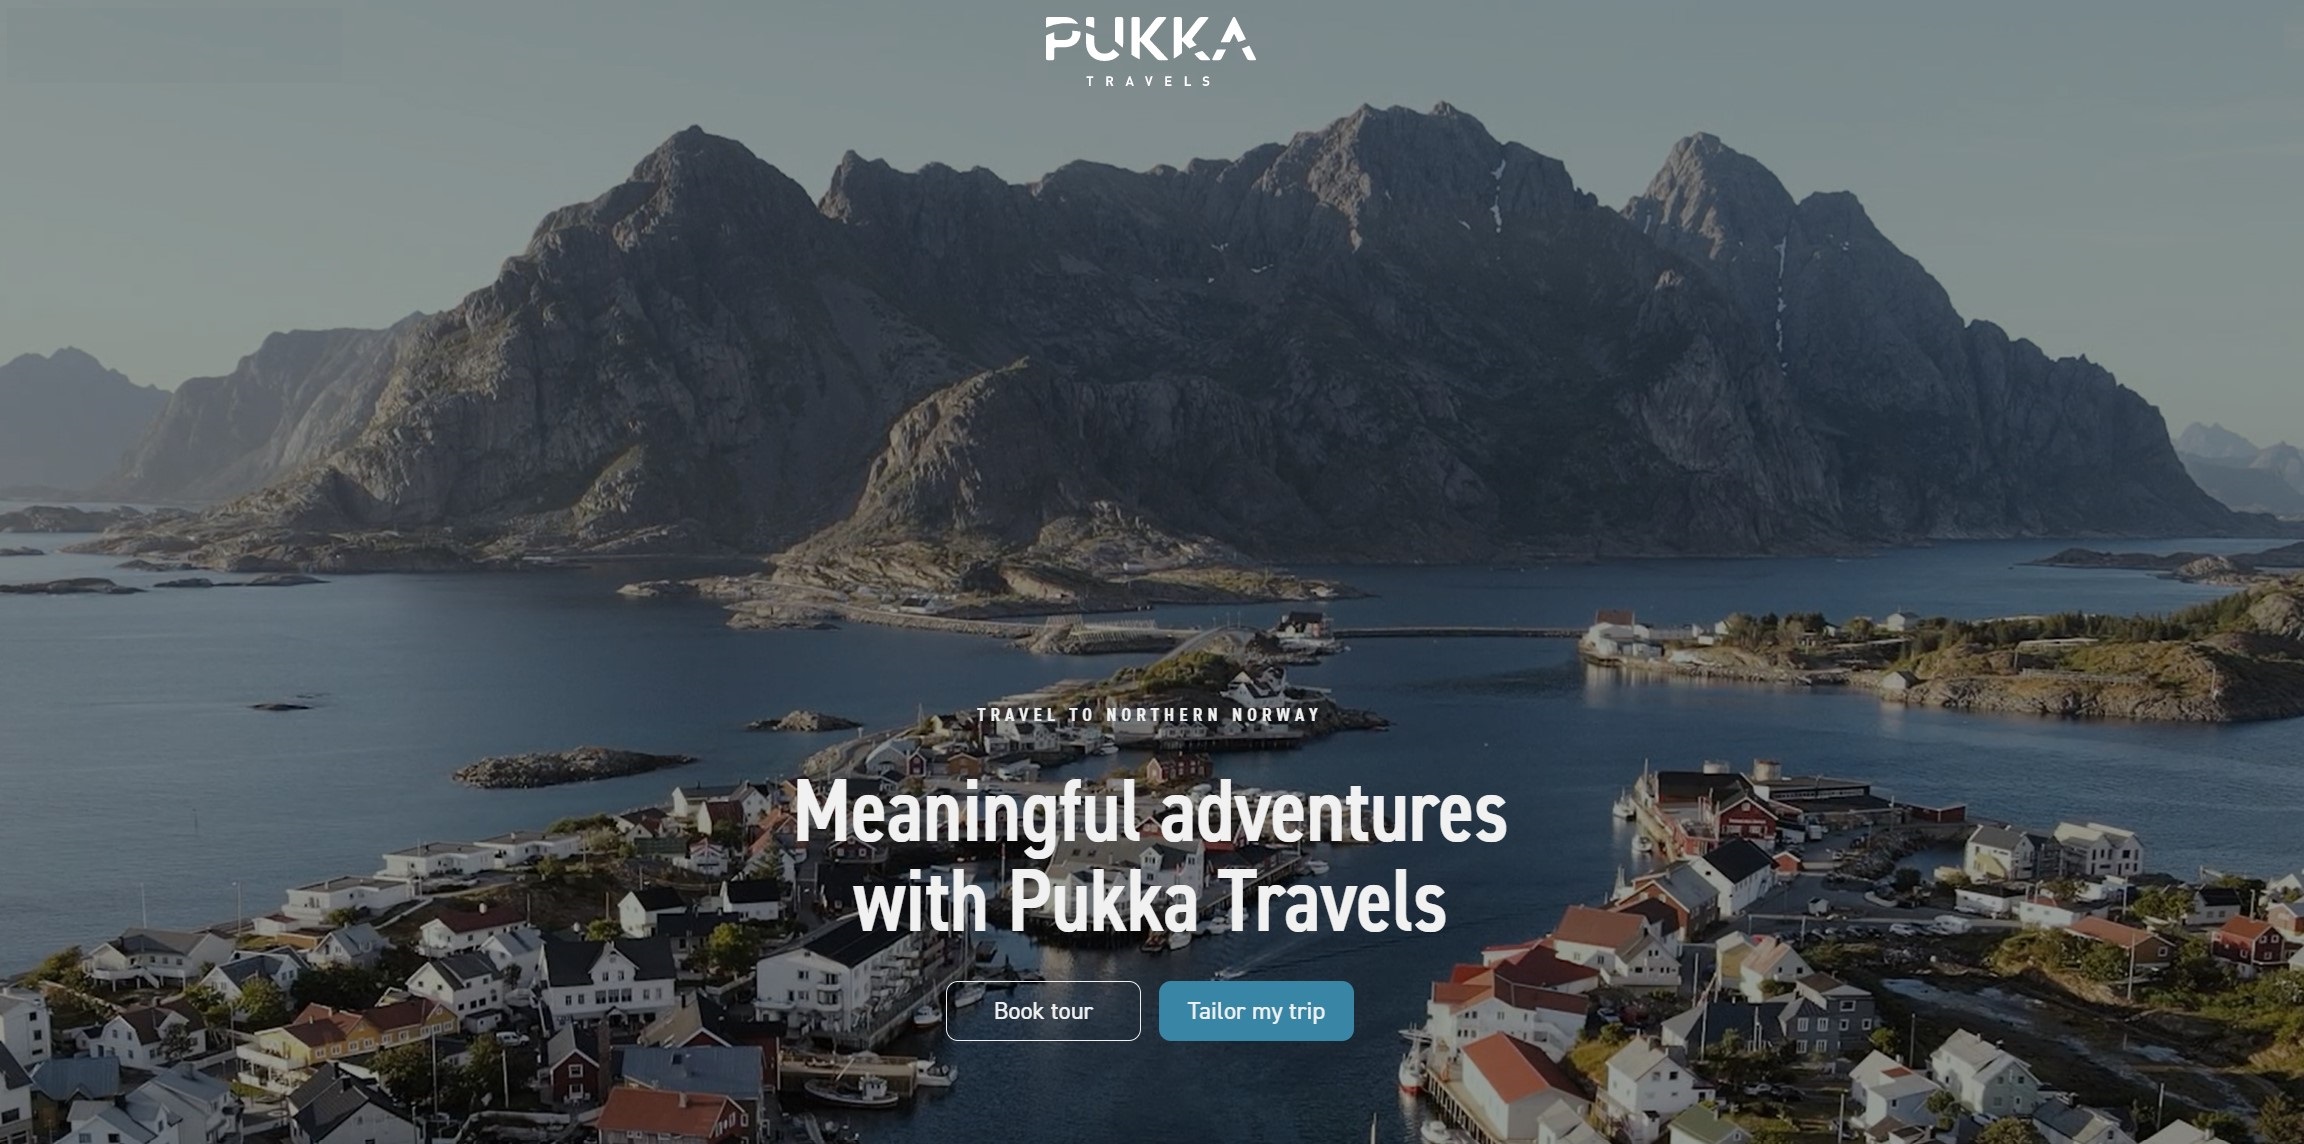 Selling Norwegian experiences with Pukka Travel through an API connection.